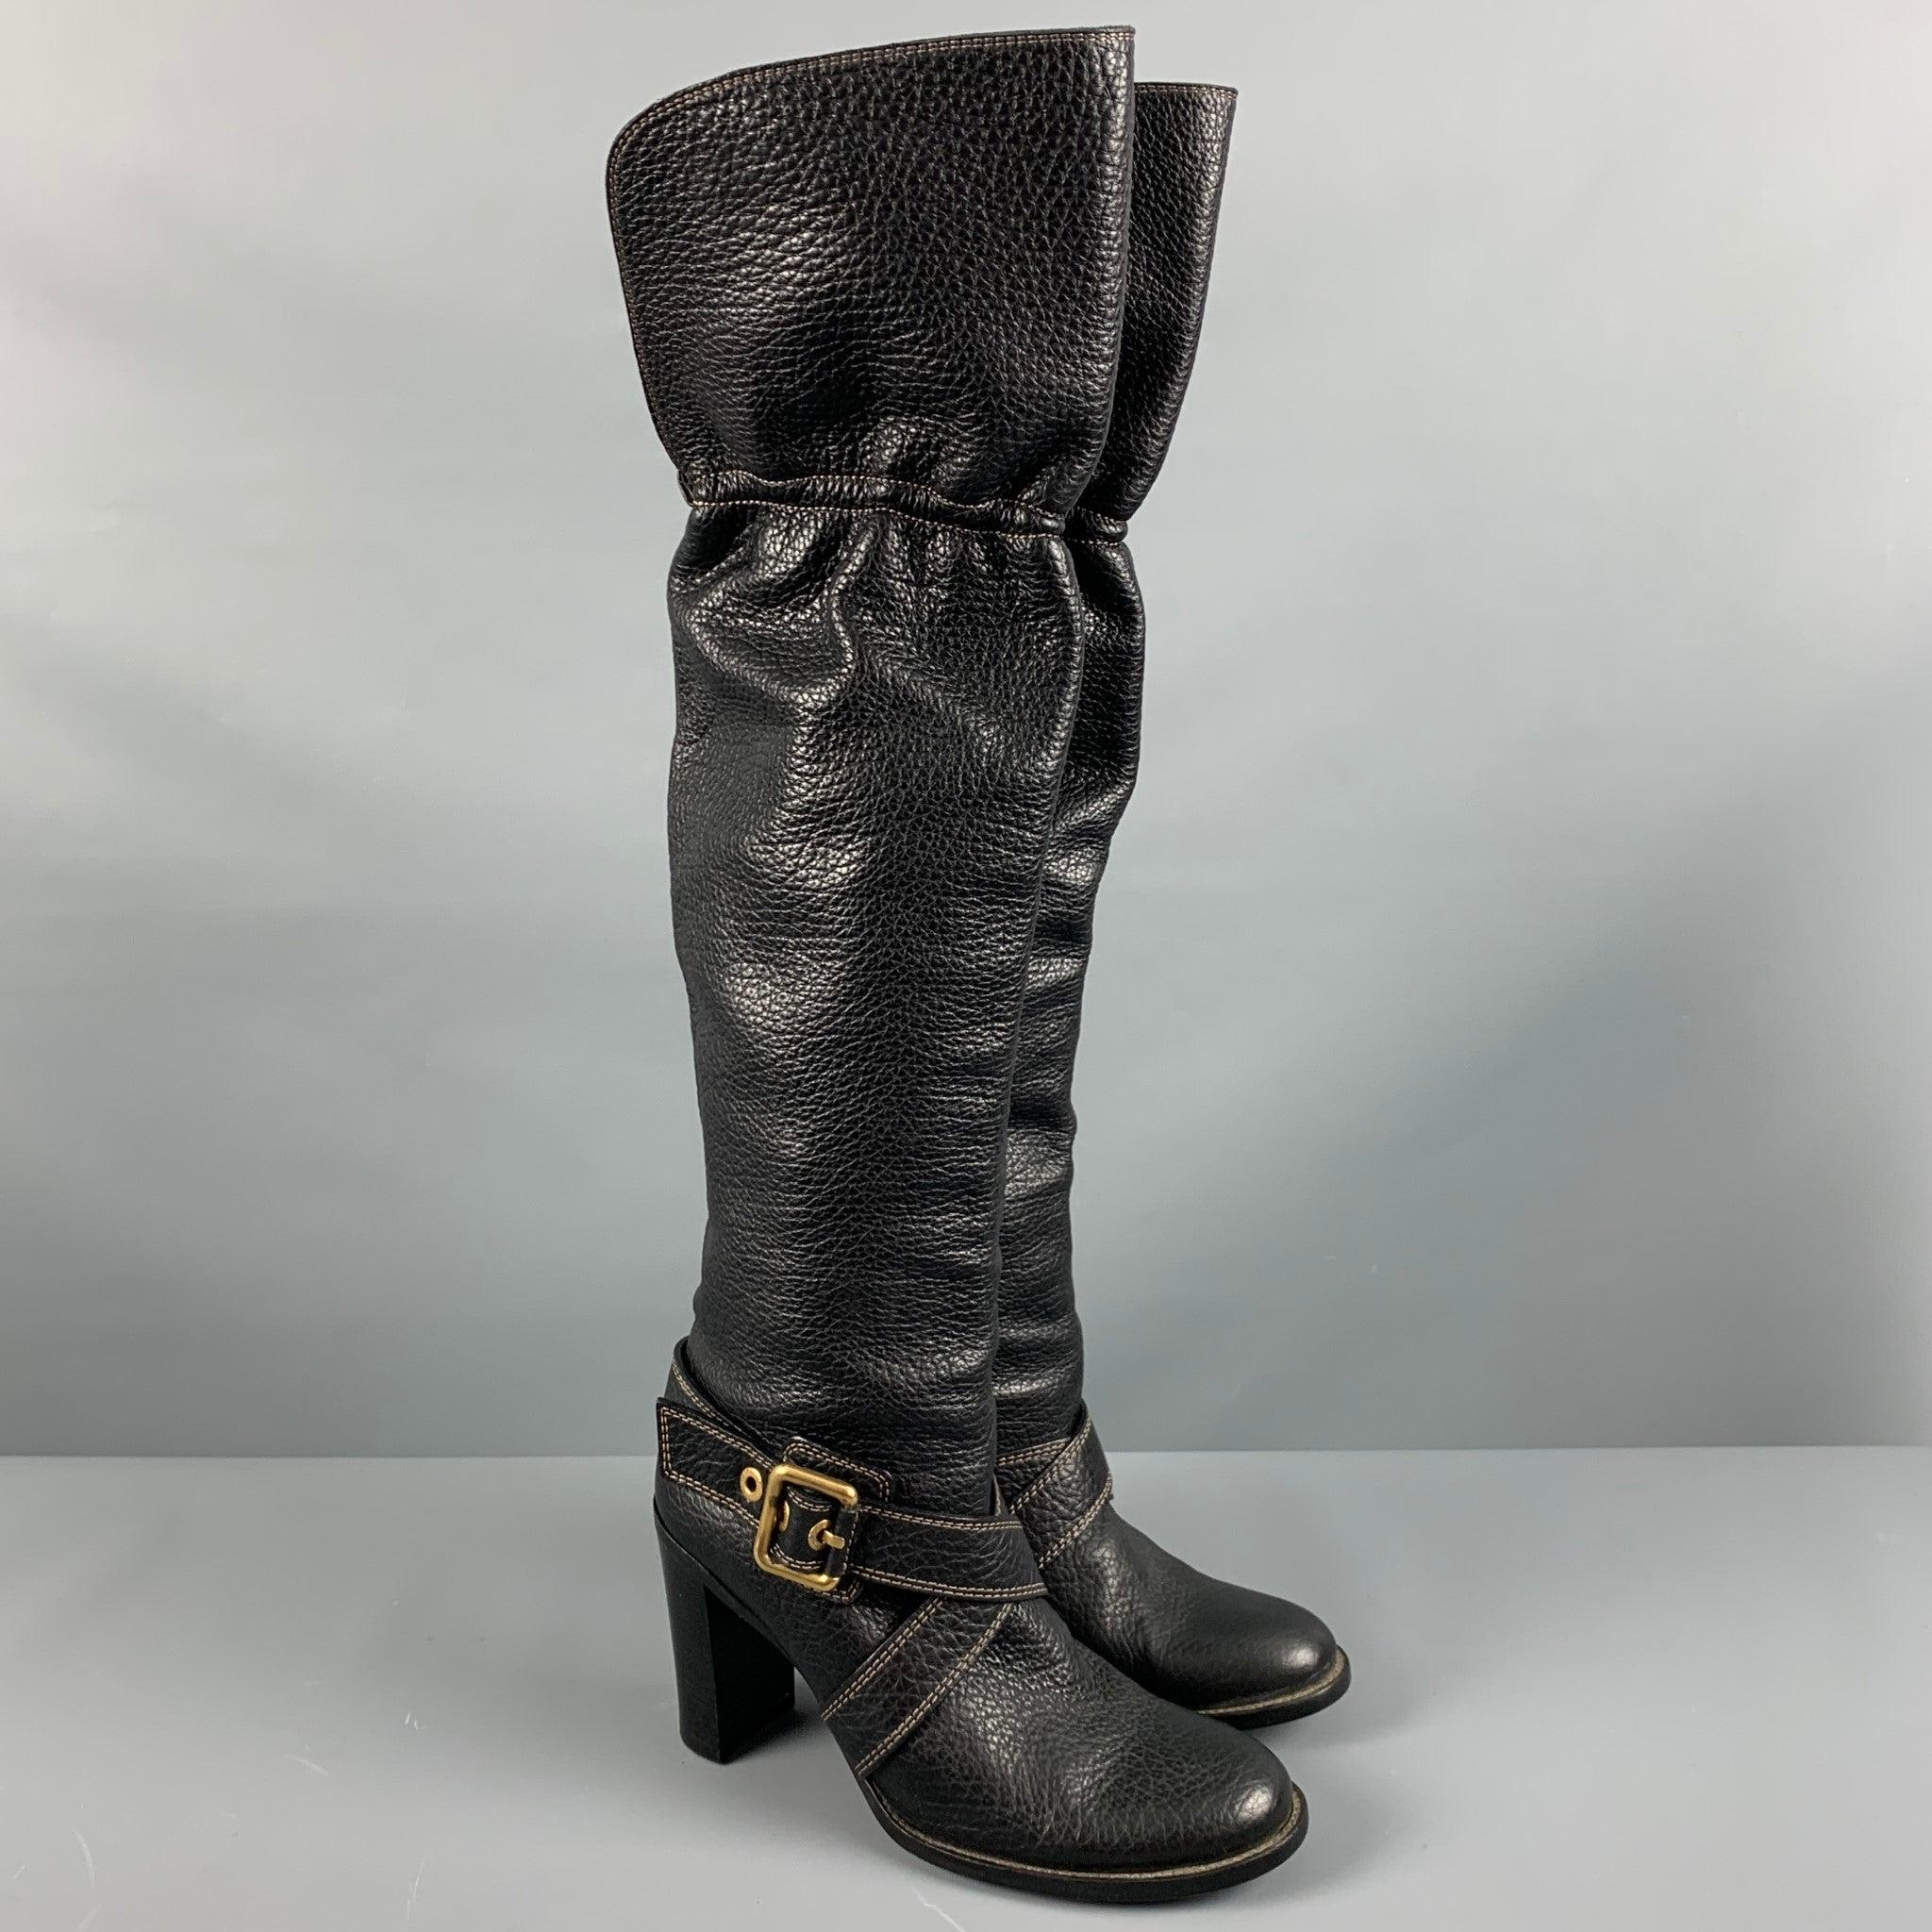 DOLCE & GABBANA
boots in a black pebble grain leather featuring an over the knee style, gold tone ankle strap, contrast stitching, and a chunky heel. Made in Italy.Very Good Pre-Owned Condition. Minor signs of wear. 

Marked:   40 

Measurements: 
 